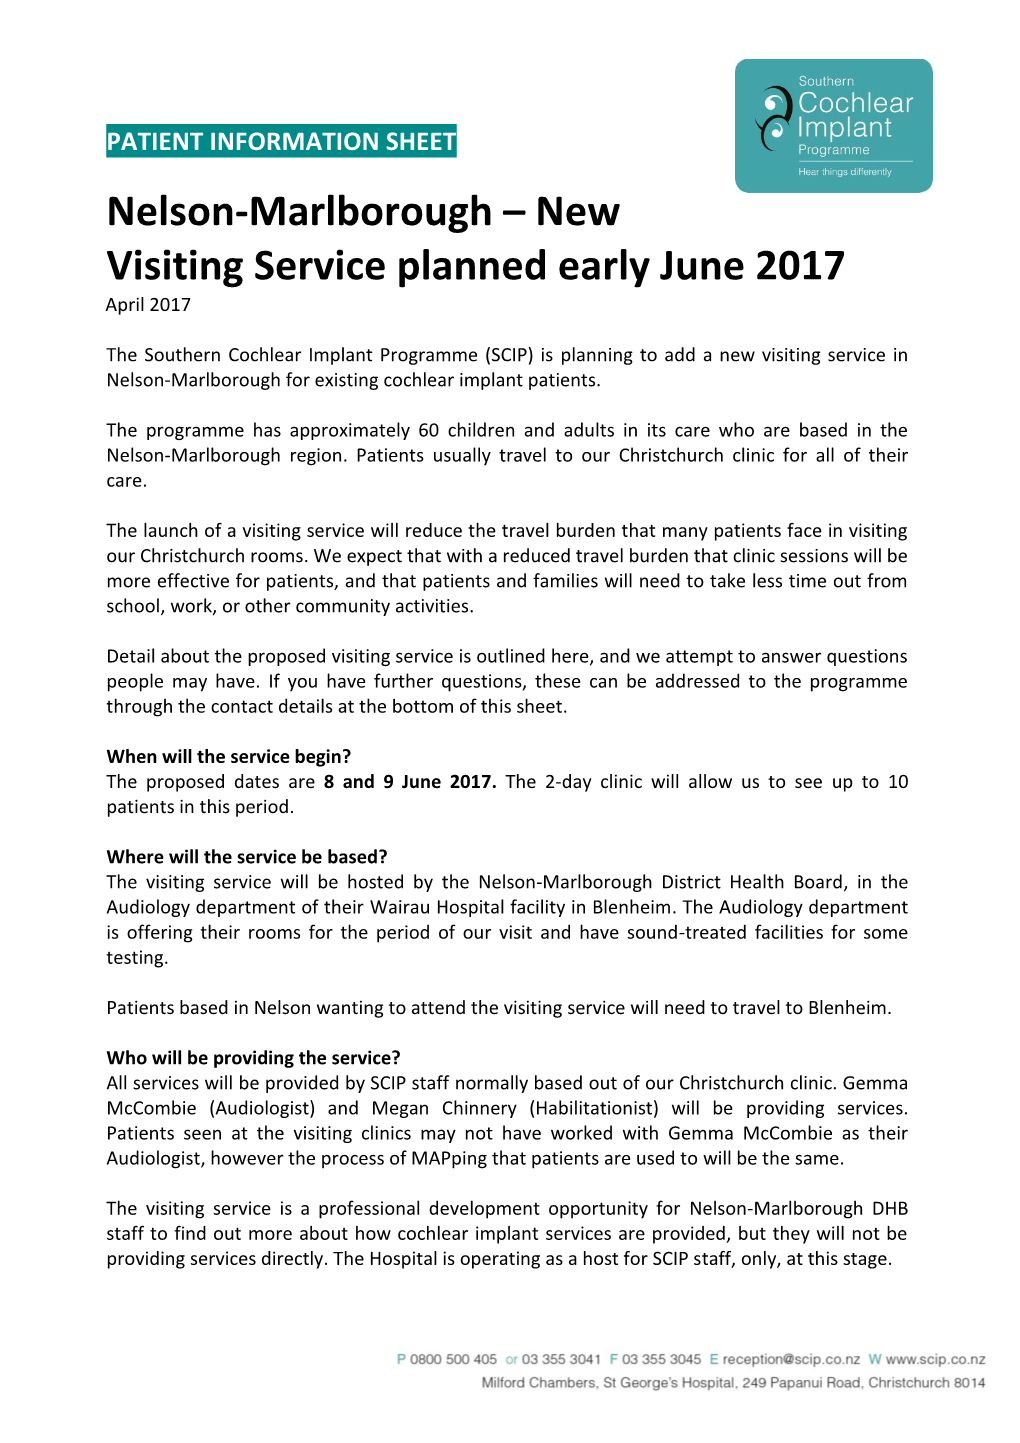 Nelson-Marlborough – New Visiting Service Planned Early June 2017 April 2017